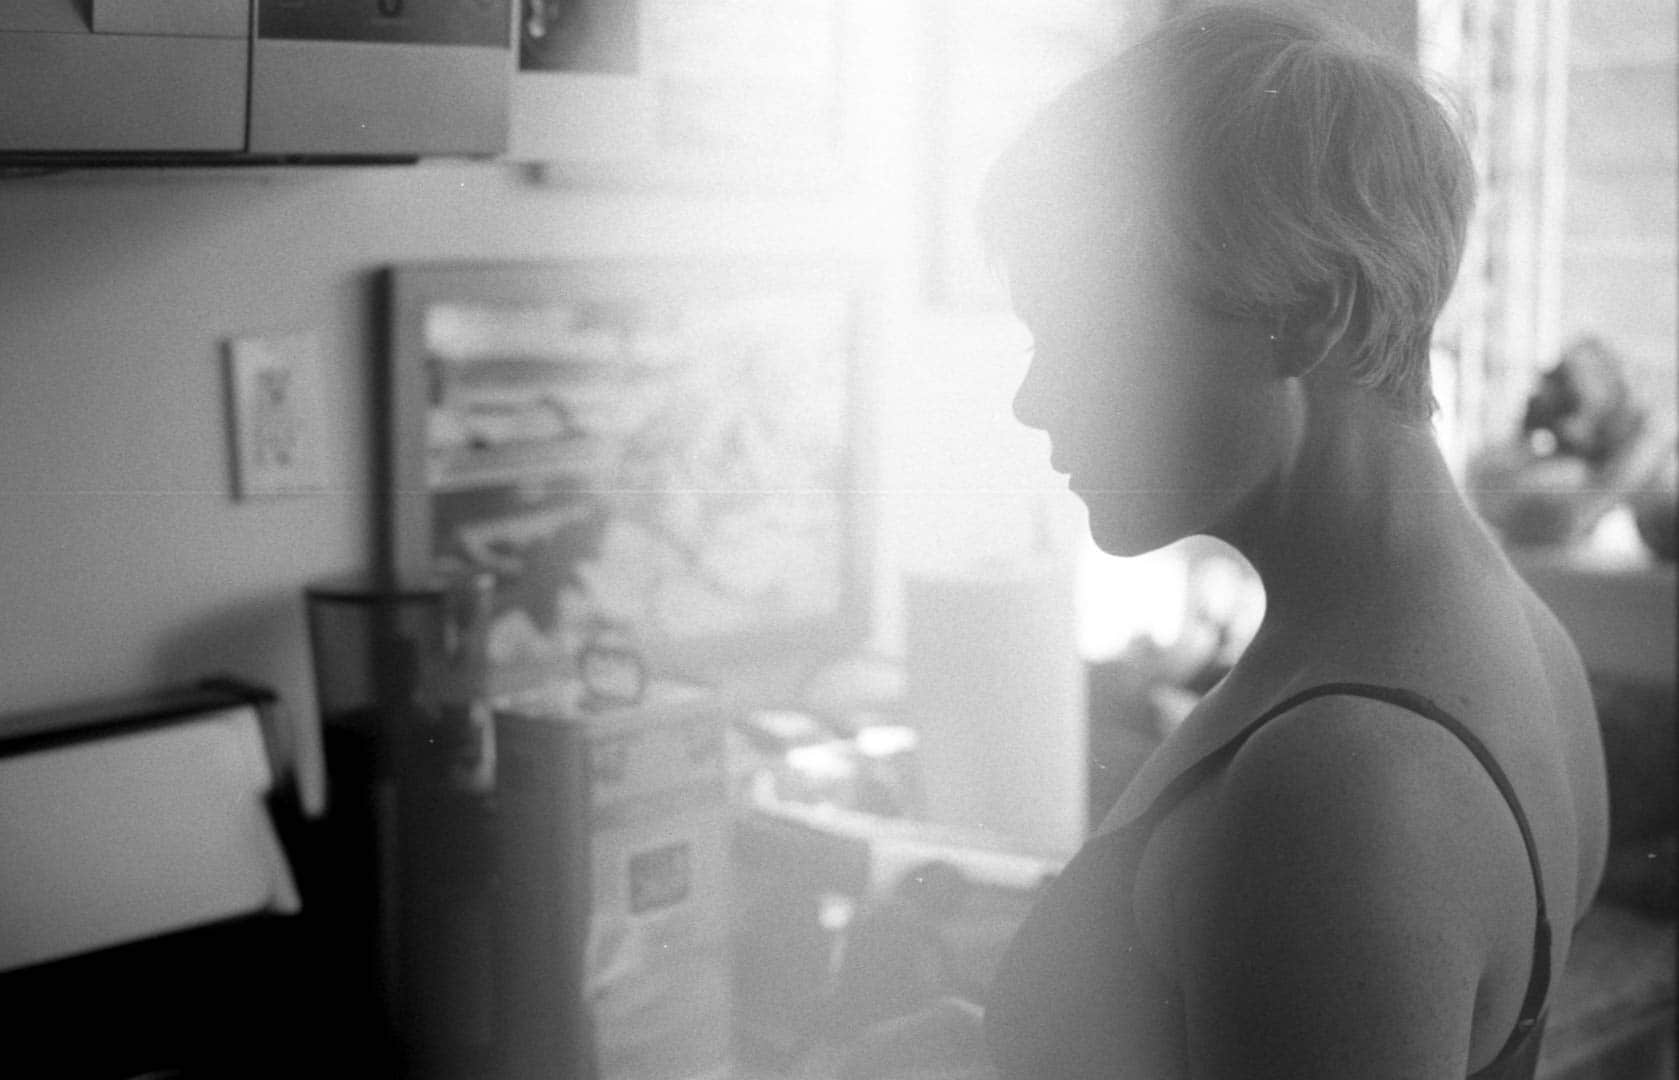 My wife in the kitchen. A light leak washed out part of the image in an artistic way.